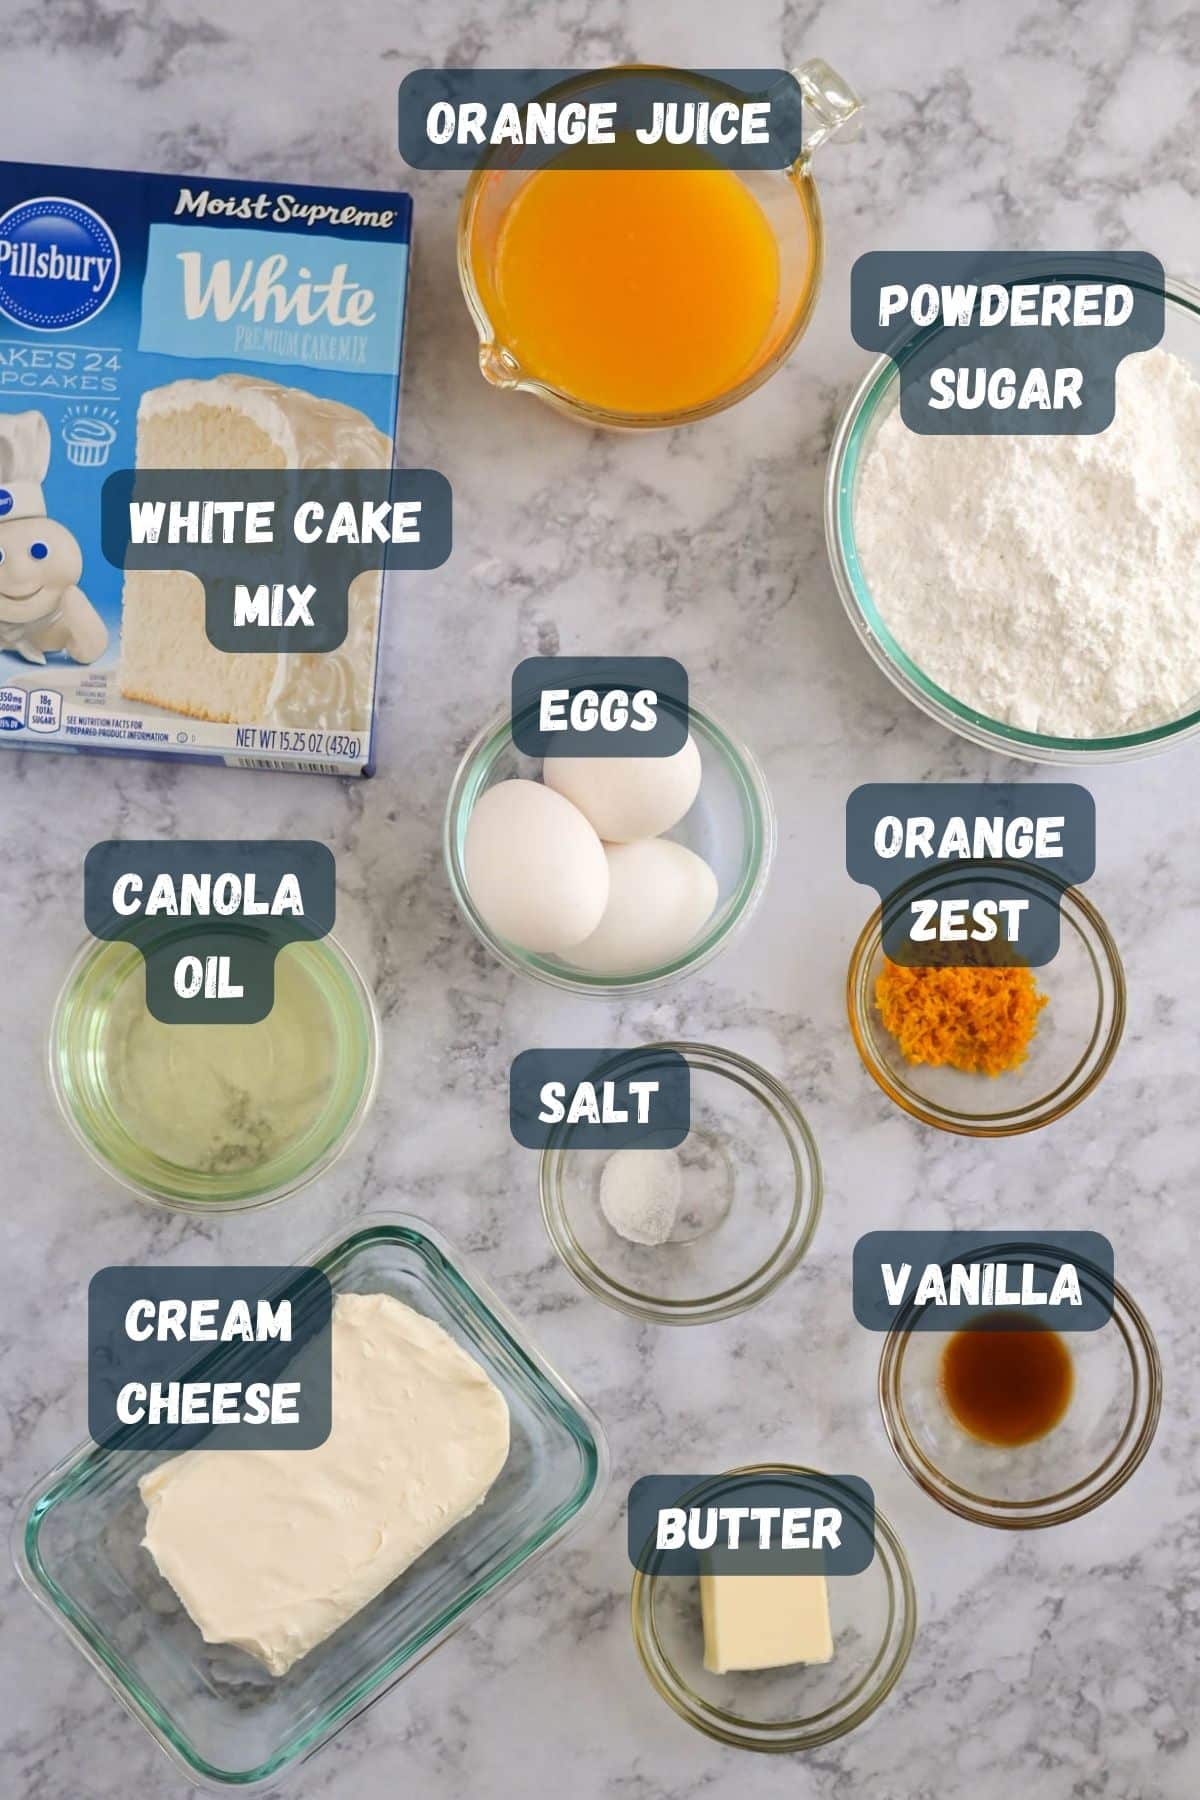 A variety of baking ingredients are laid out on a marble surface. Labels identify them as white cake mix, powdered sugar, eggs, orange juice, orange zest, canola oil, cream cheese, butter, salt, and vanilla.